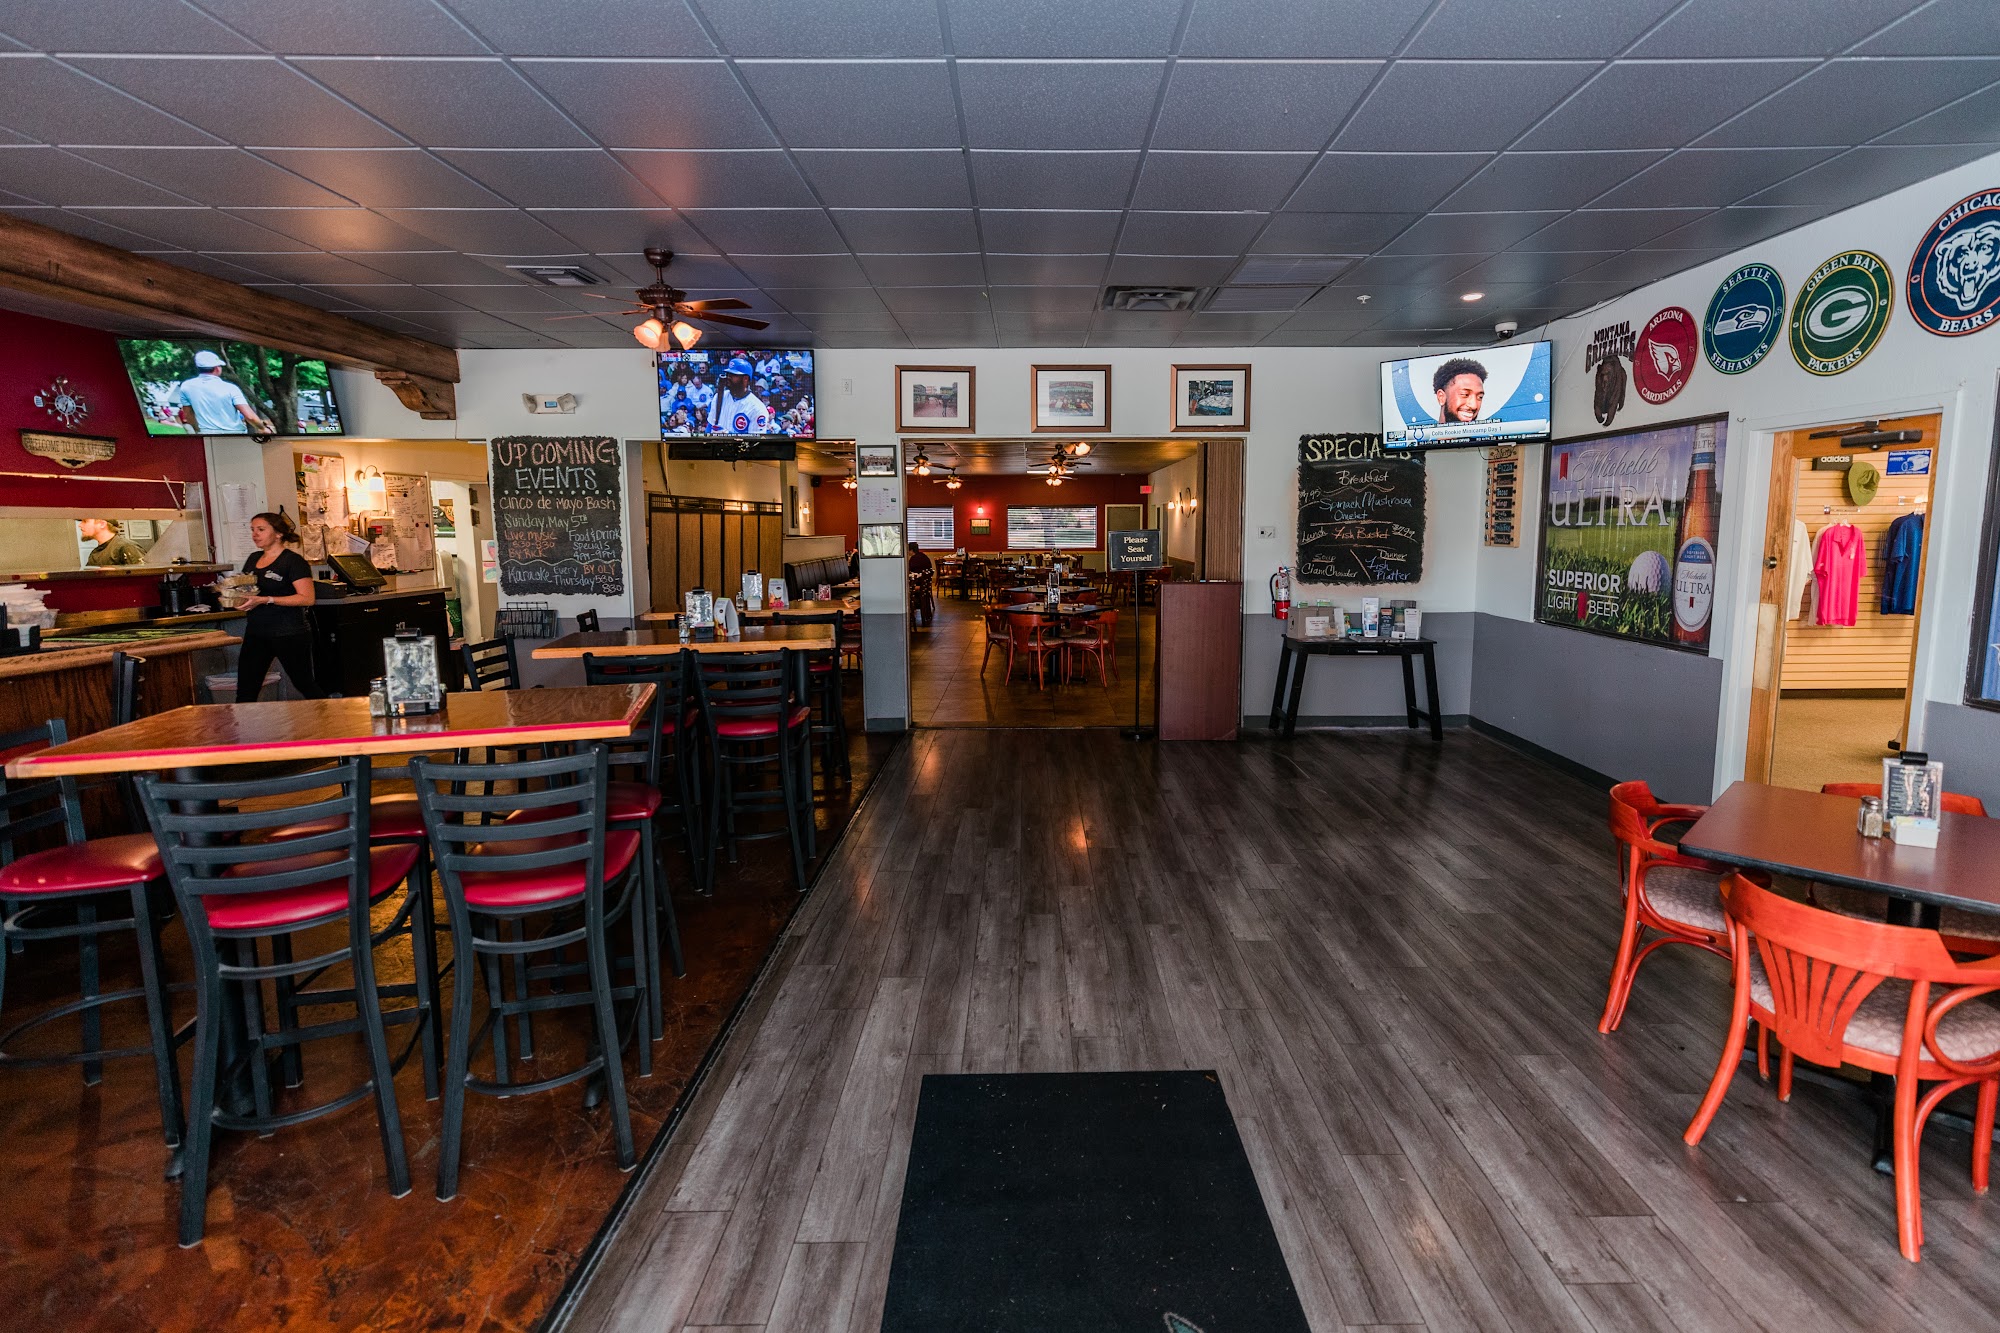 Rochester's Family Dining & Sports Bar